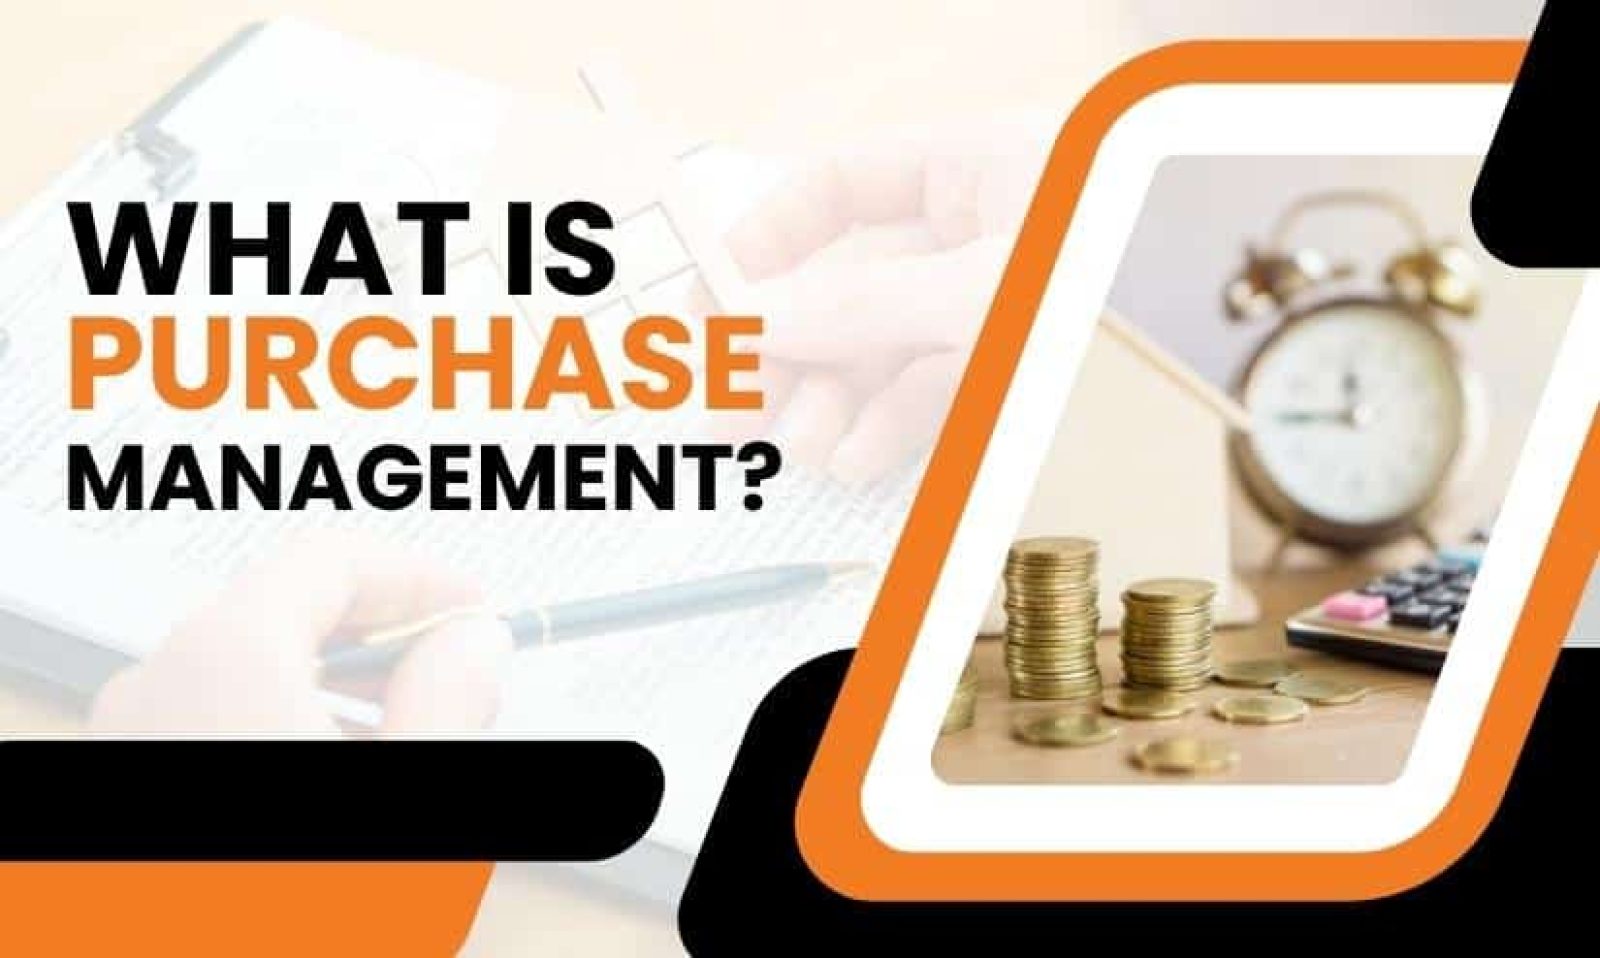 What is Purchase Management